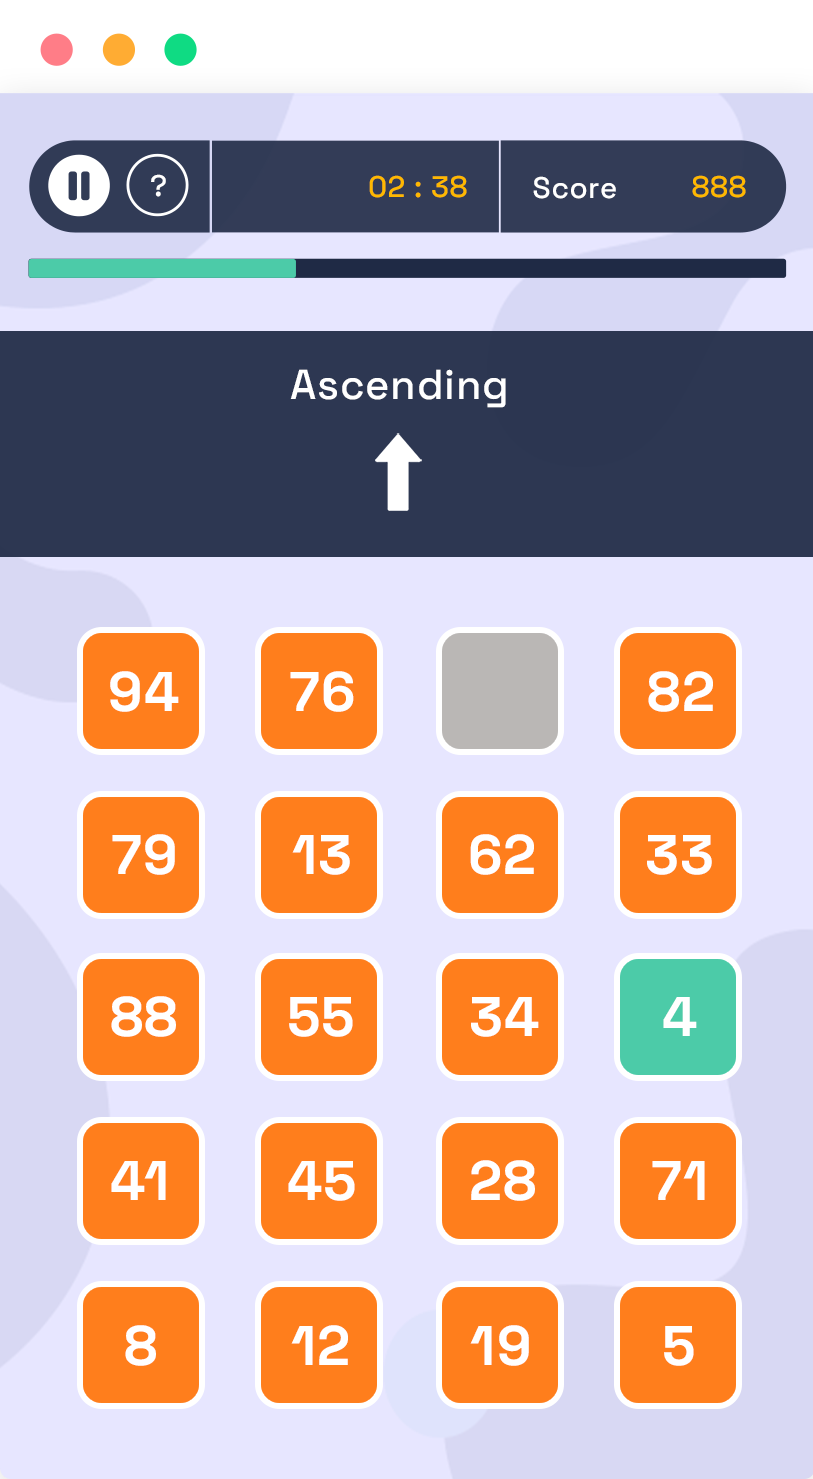 Ascending Game Example